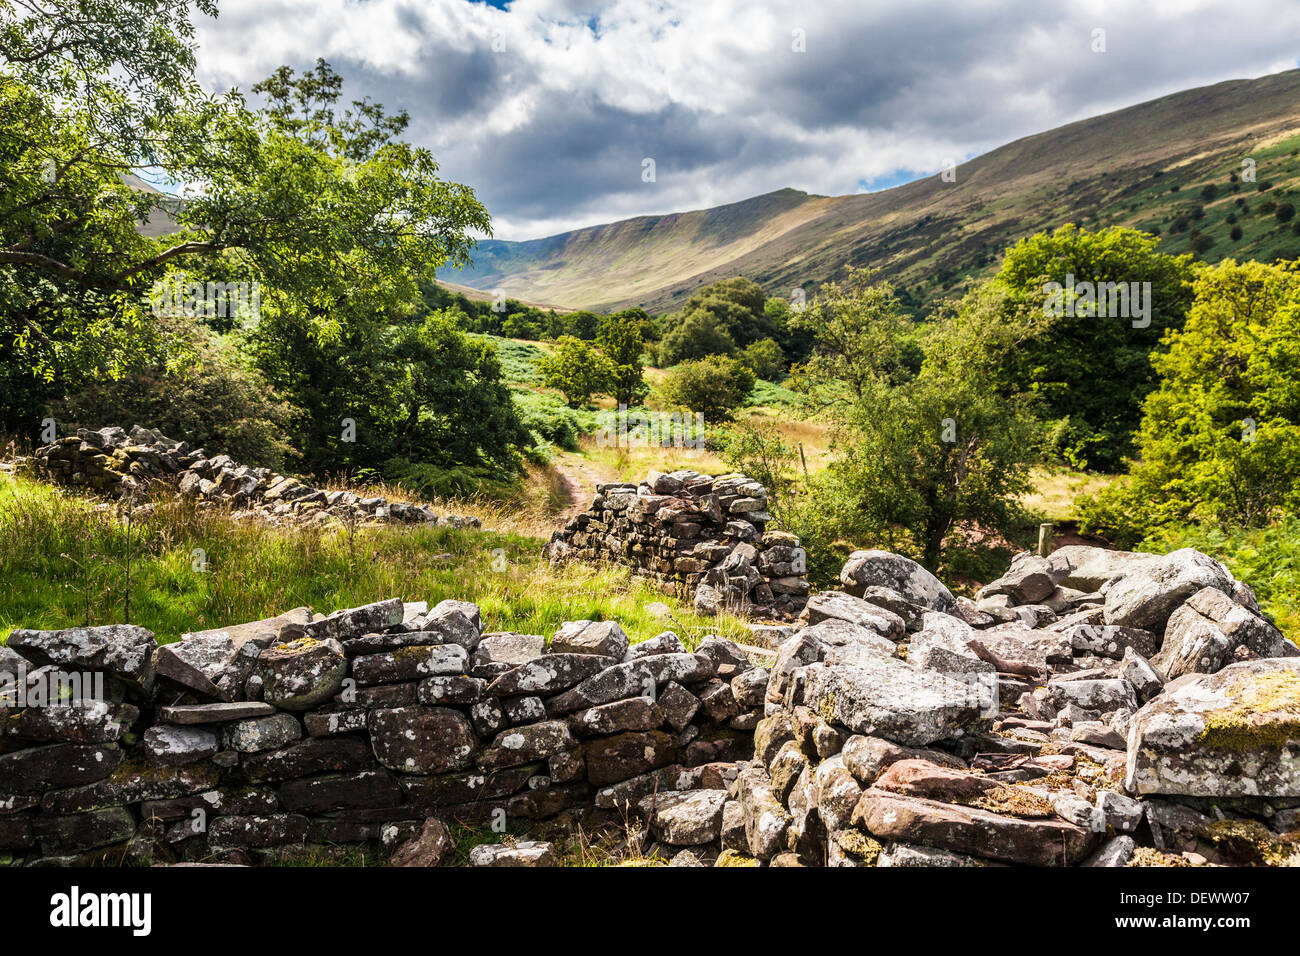 A tumbledown dry stone wall along a public footpath in the Cwm Oergwm in the Brecon Beacons National Park. Stock Photo